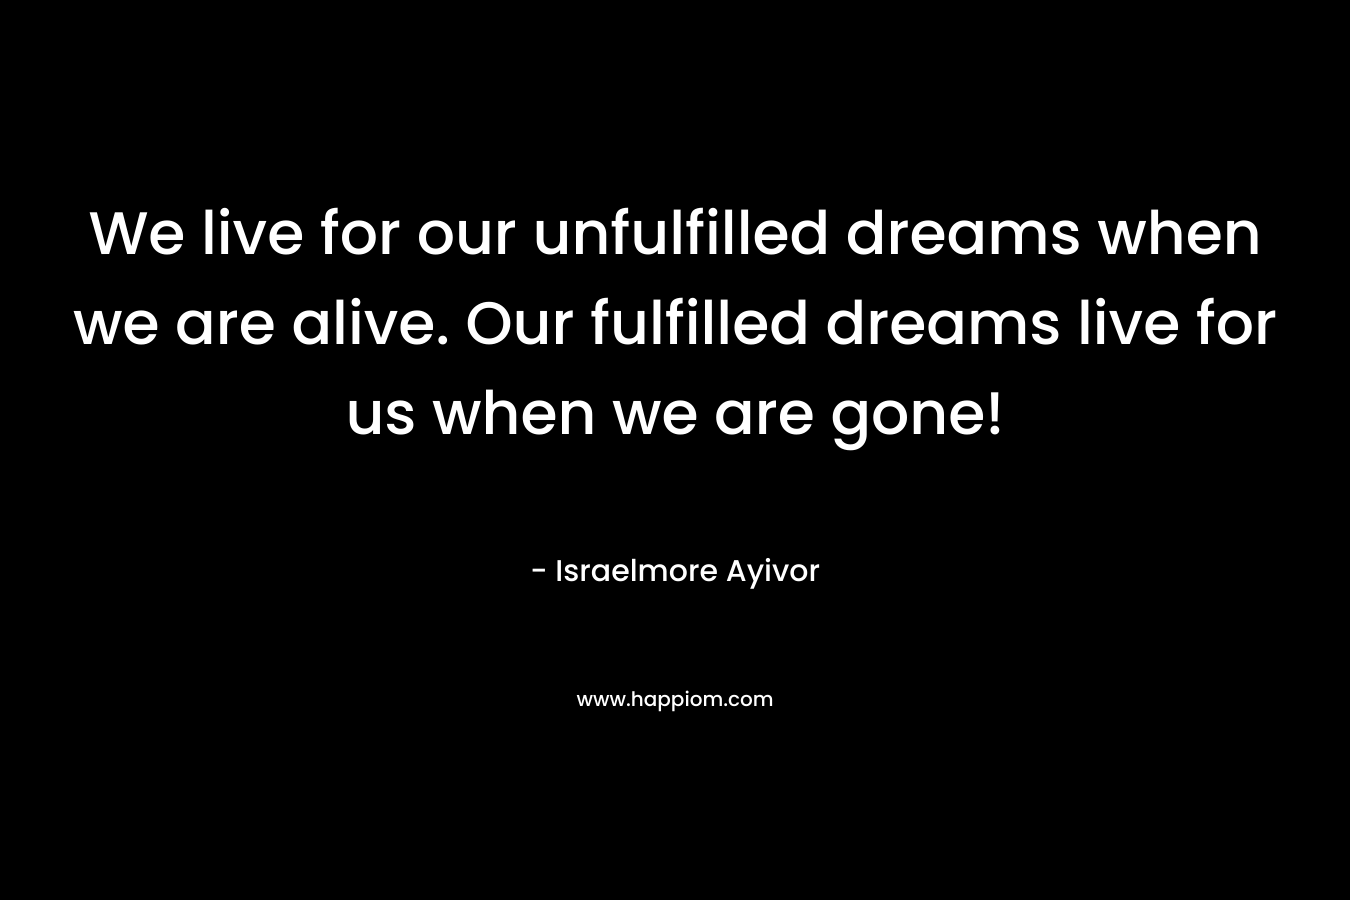 We live for our unfulfilled dreams when we are alive. Our fulfilled dreams live for us when we are gone! – Israelmore Ayivor